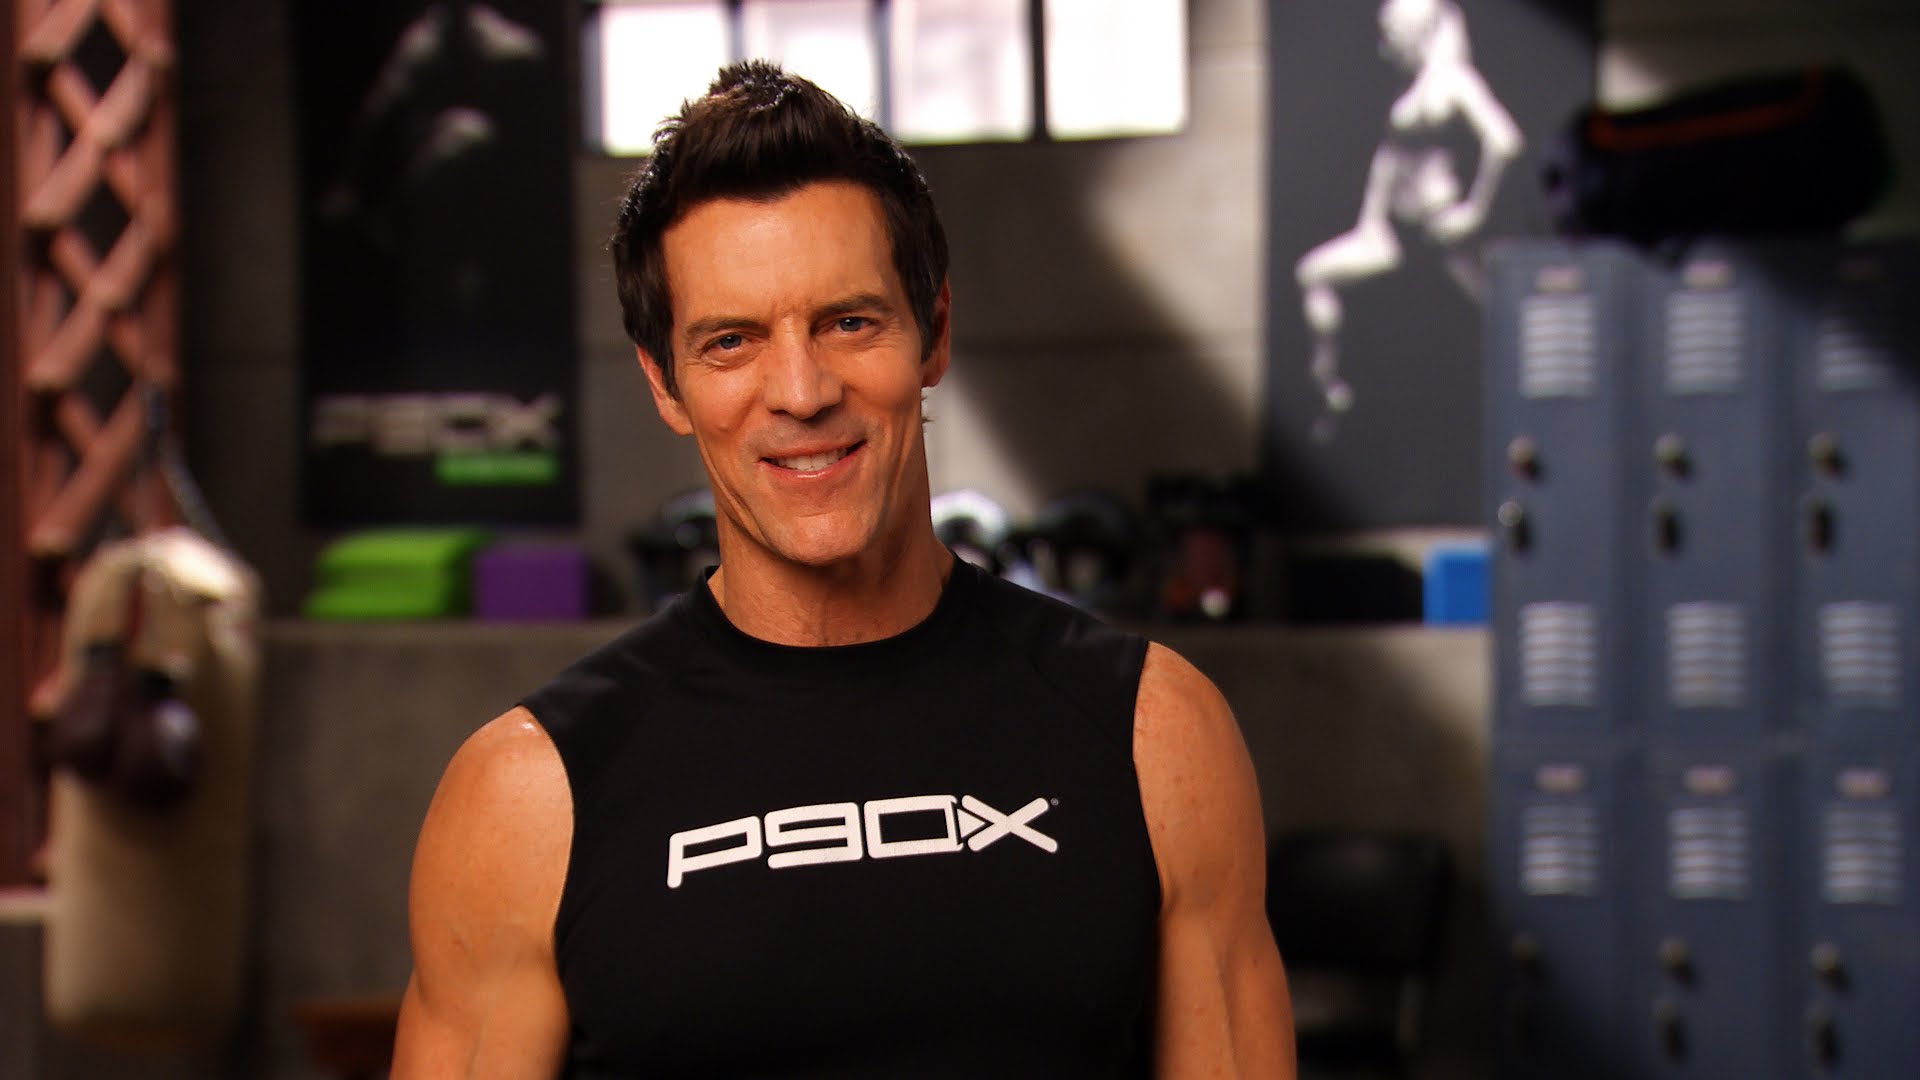 Video For P90X for Xbox Fitness Coming Exclusively to Xbox One